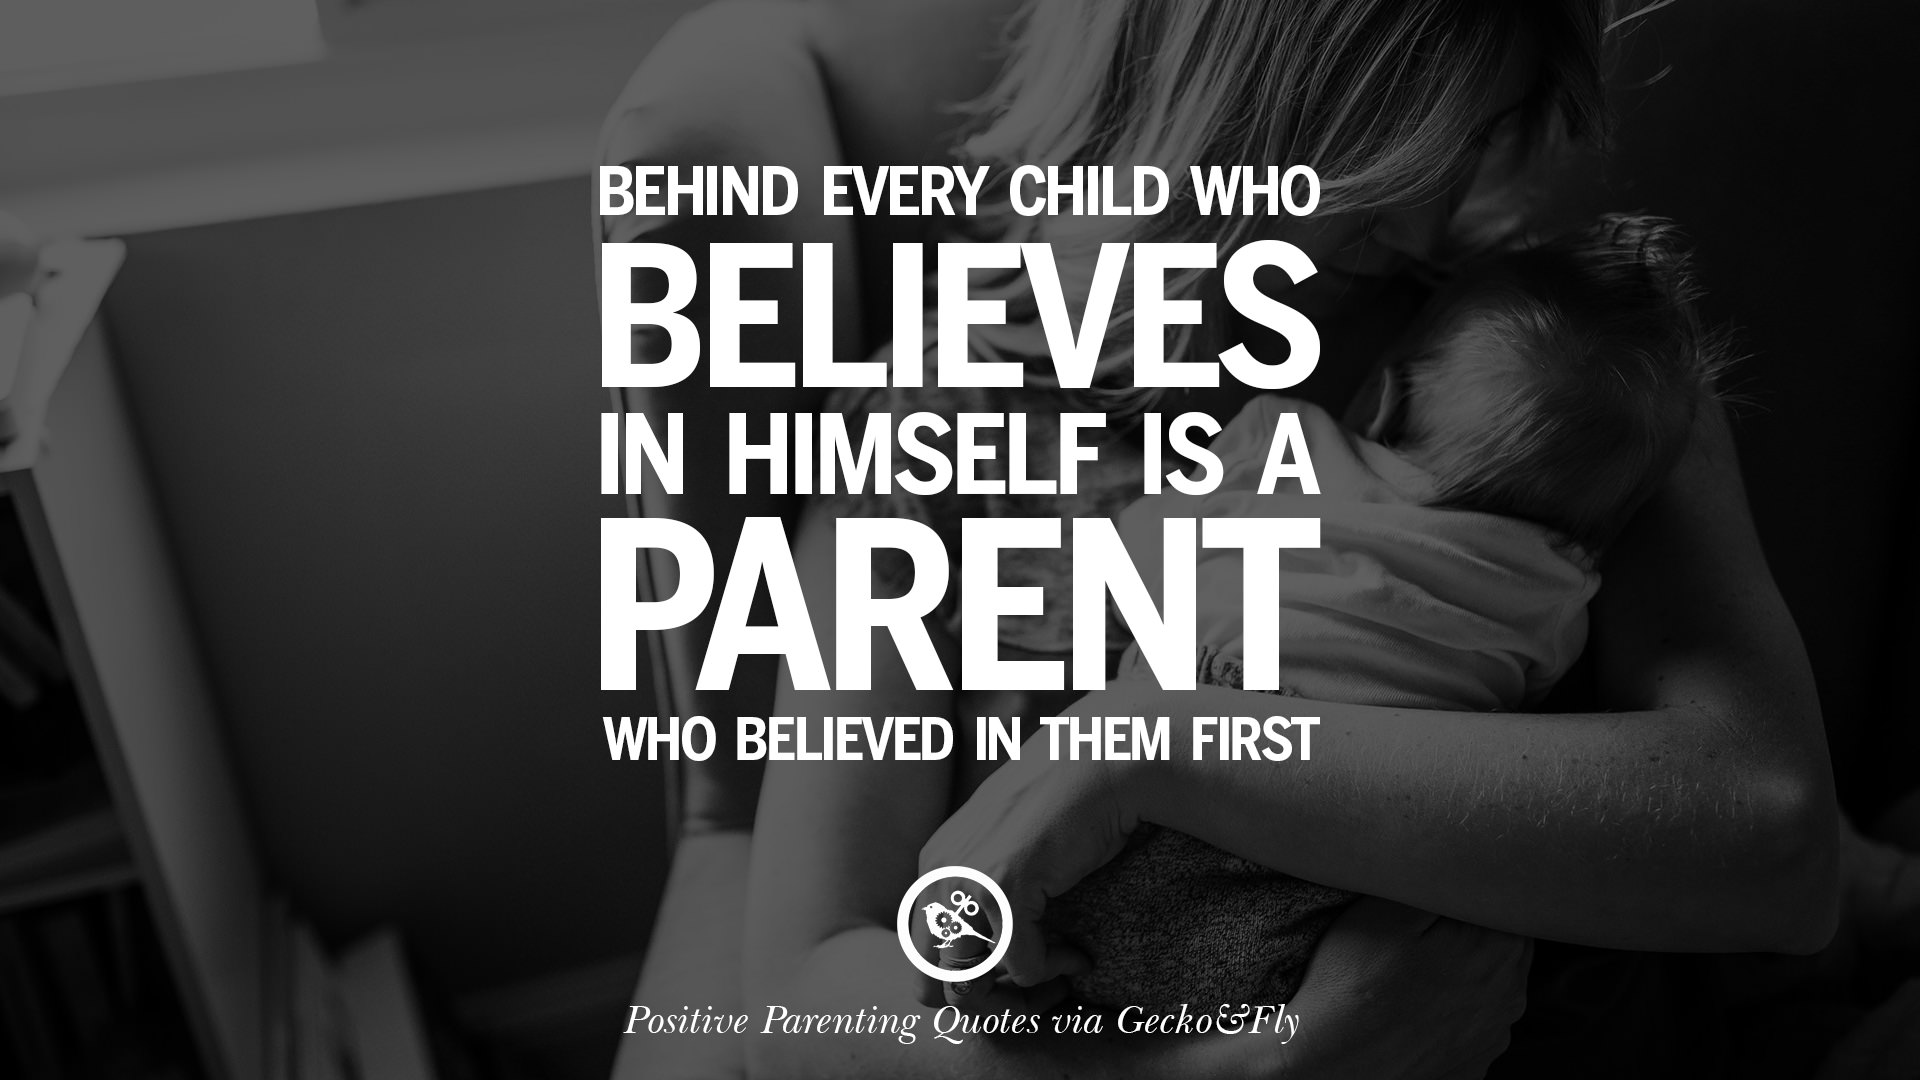 Raising Children with Trust, Love and Support